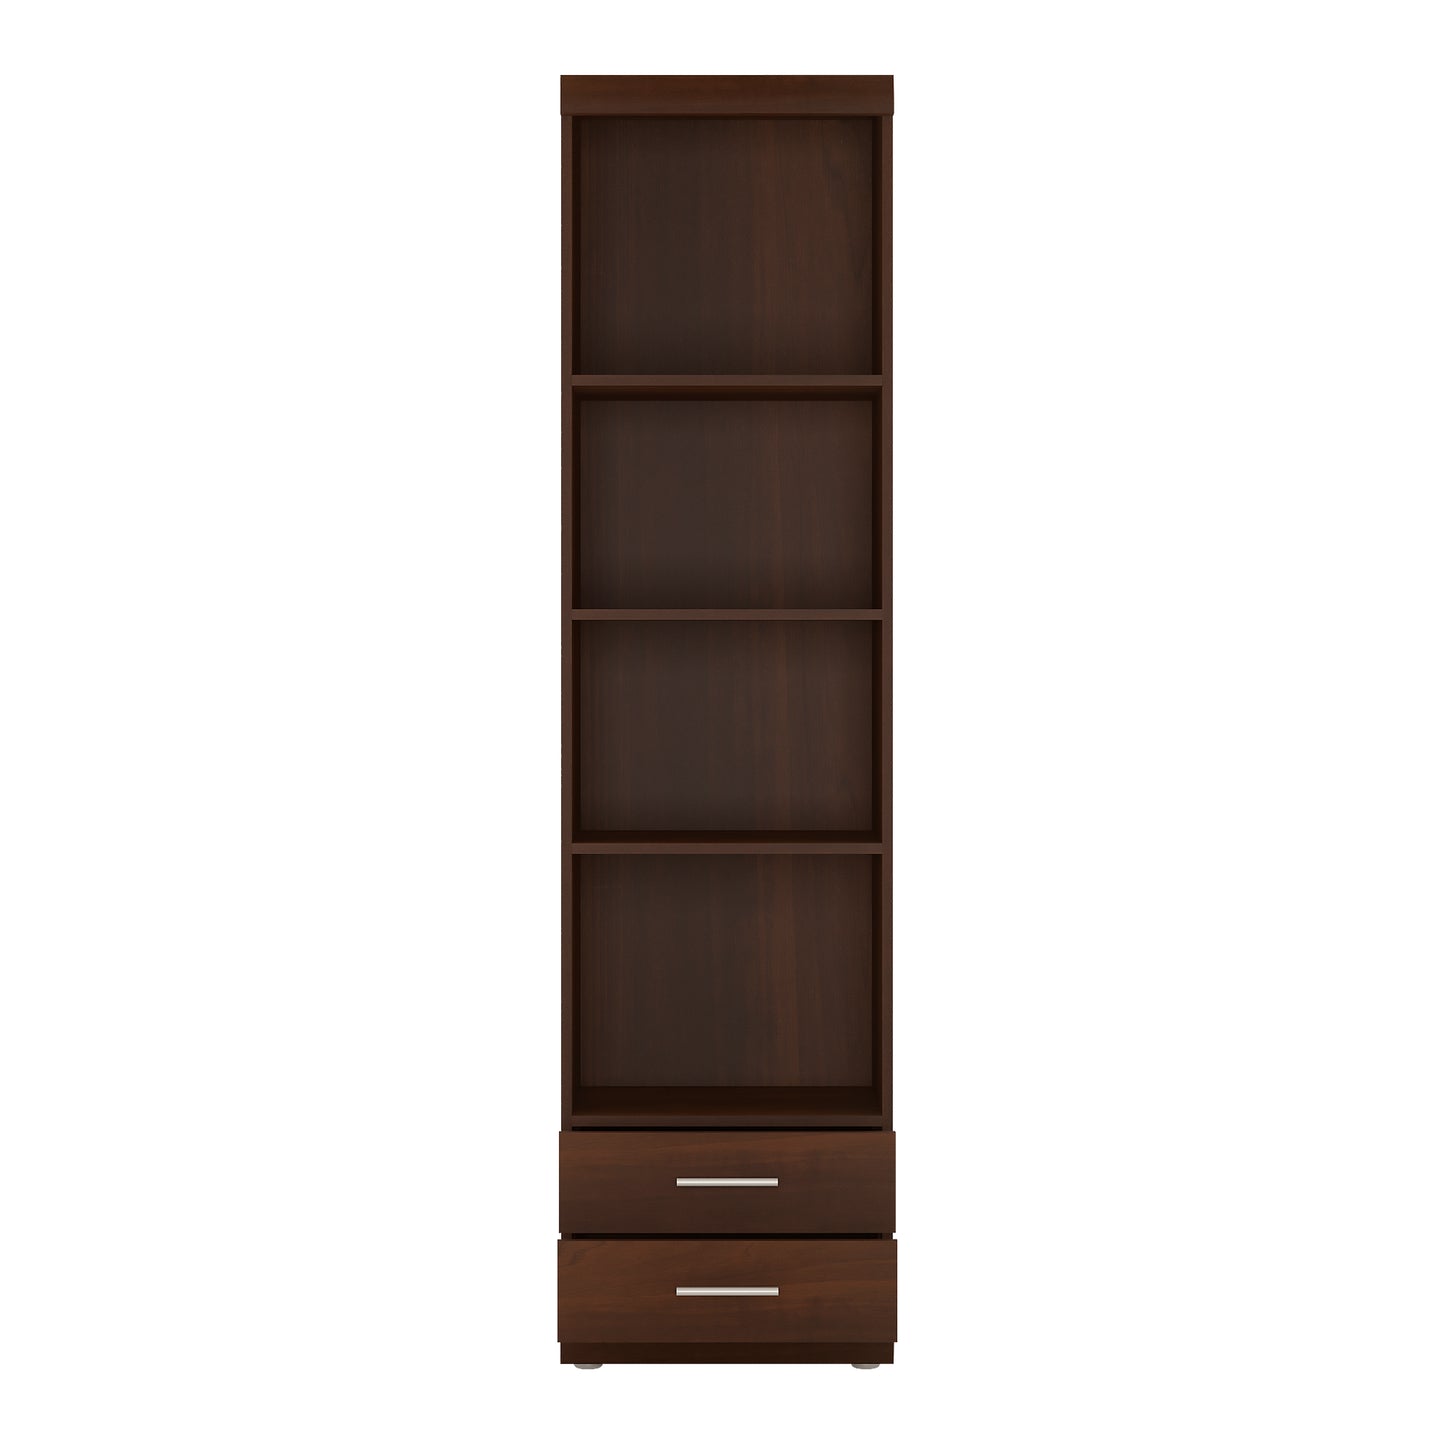 Imperial  Tall 2 Drawer Narrow Cabinet with Open Shelving in Dark Mahogany Melamine